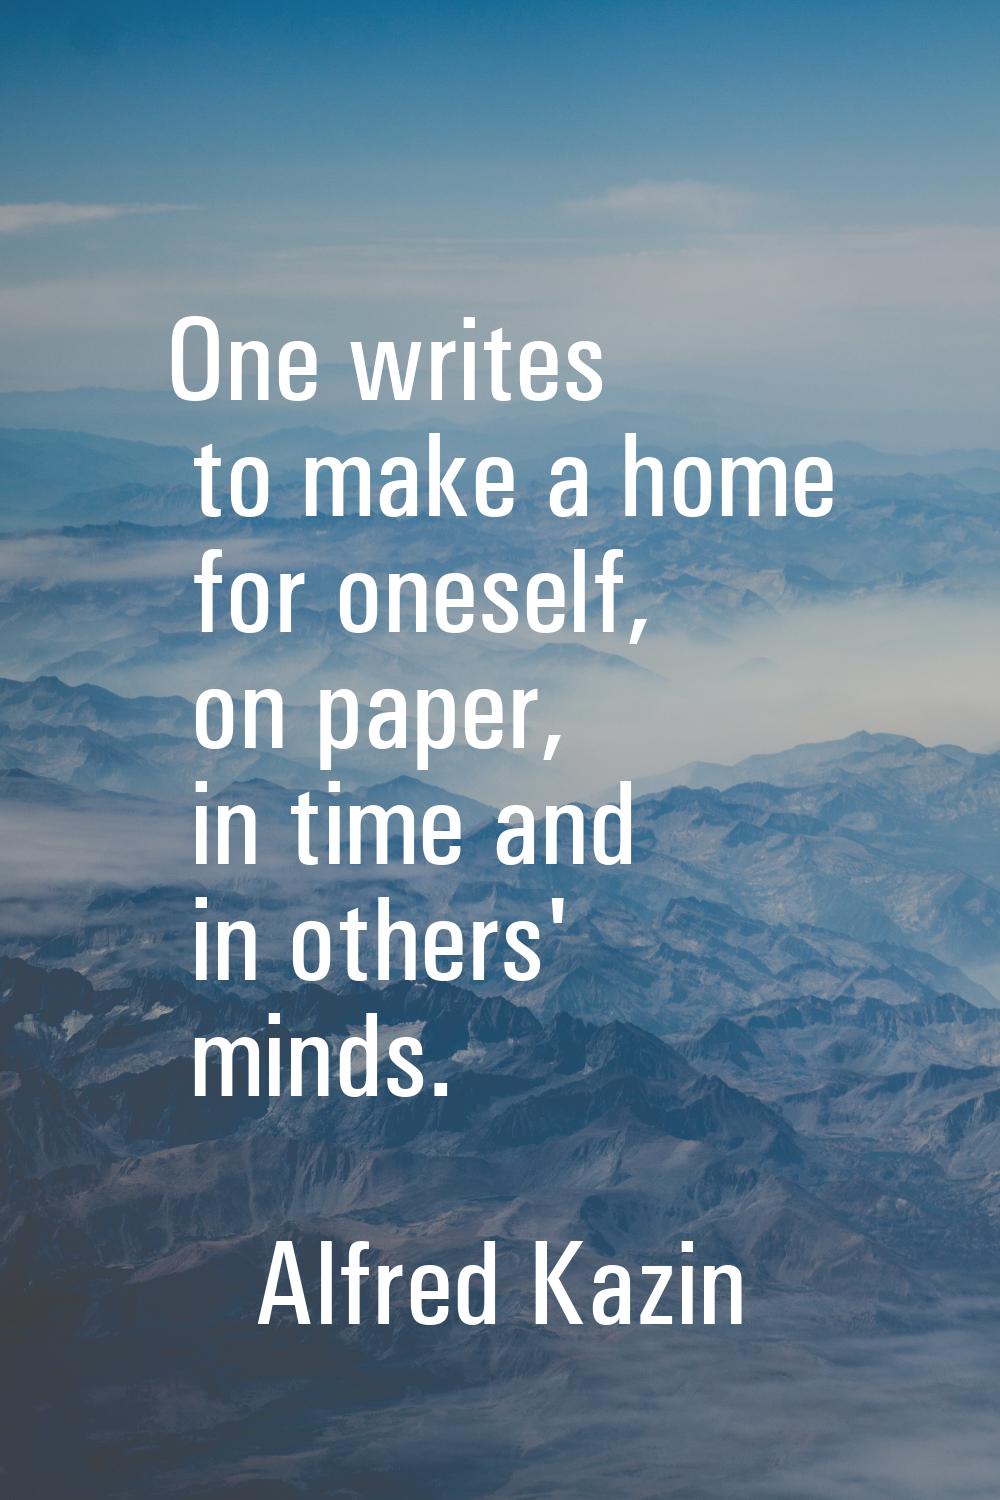 One writes to make a home for oneself, on paper, in time and in others' minds.